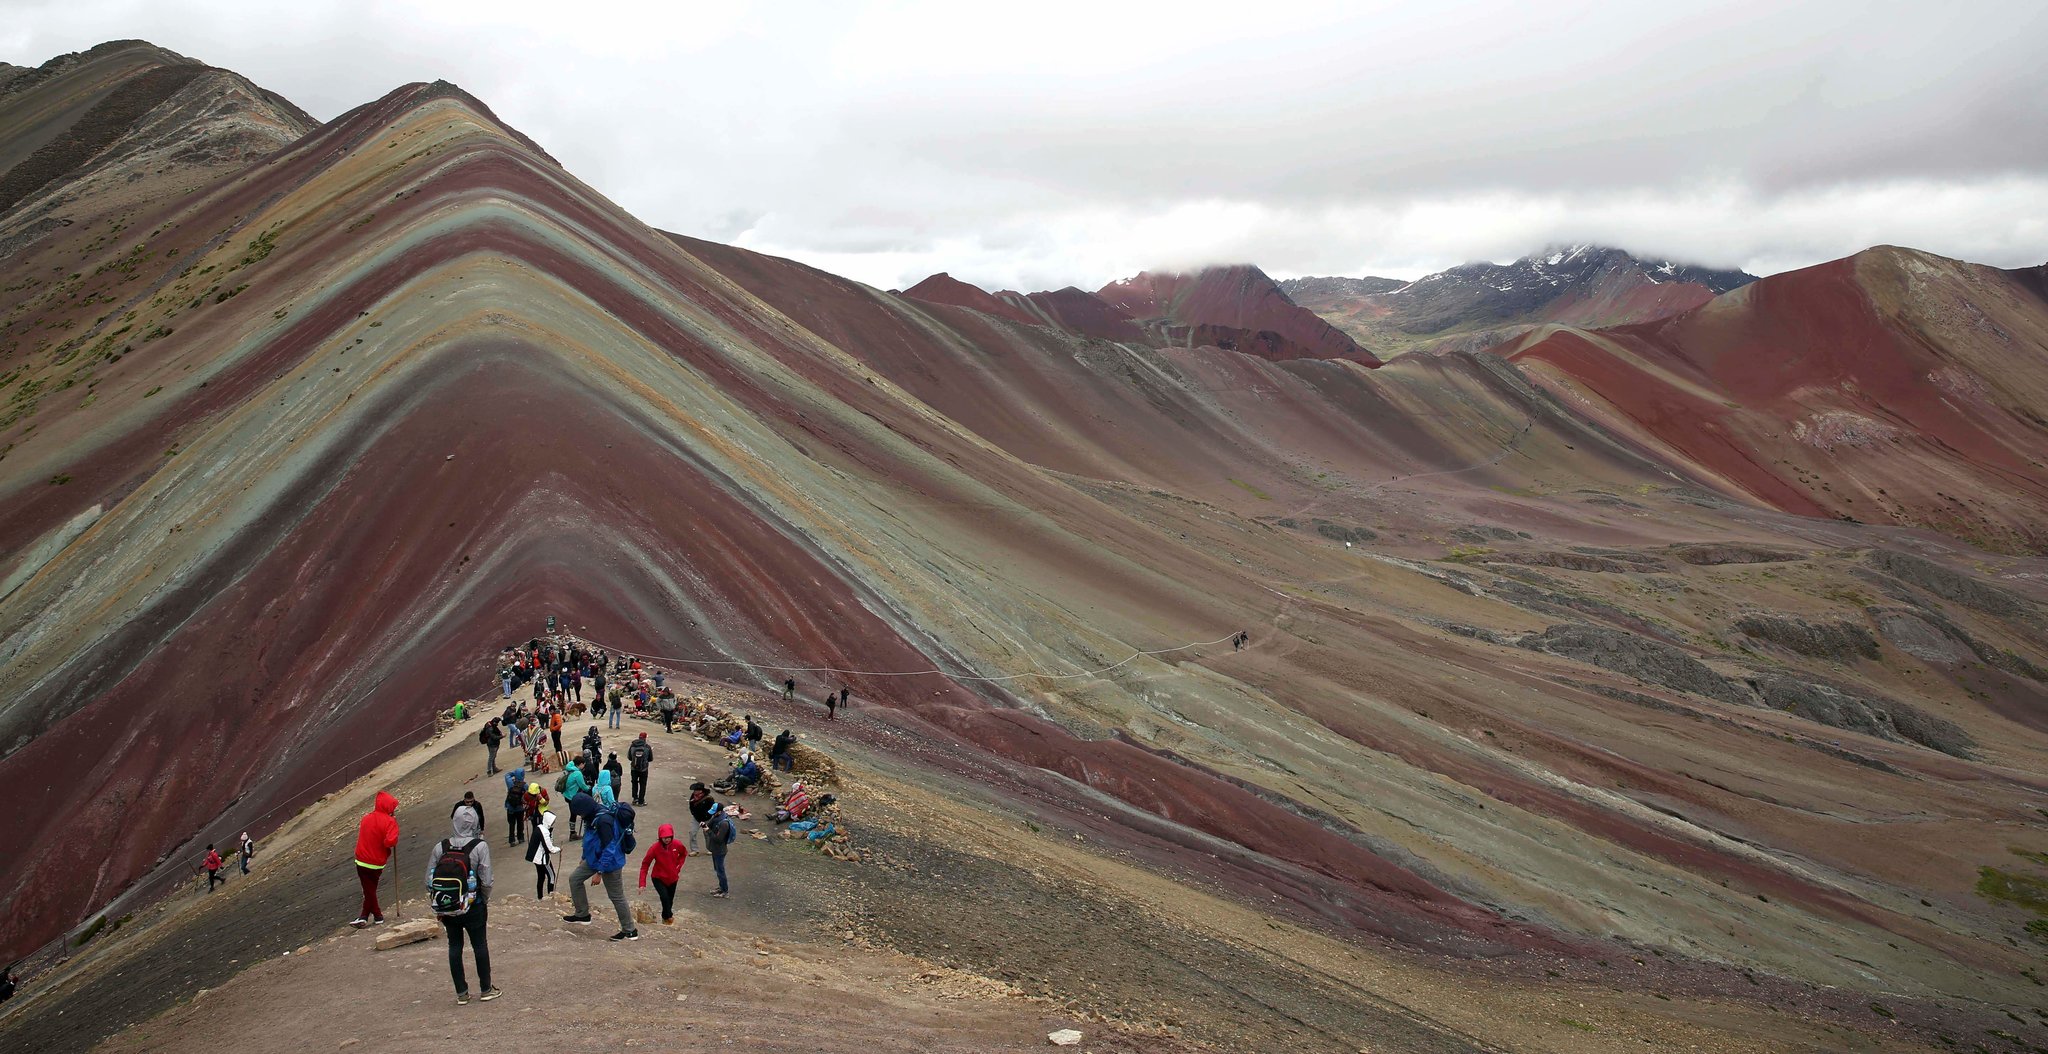 Will Tourism Ruin the Rainbow Mountain of Peru? - The New York Times